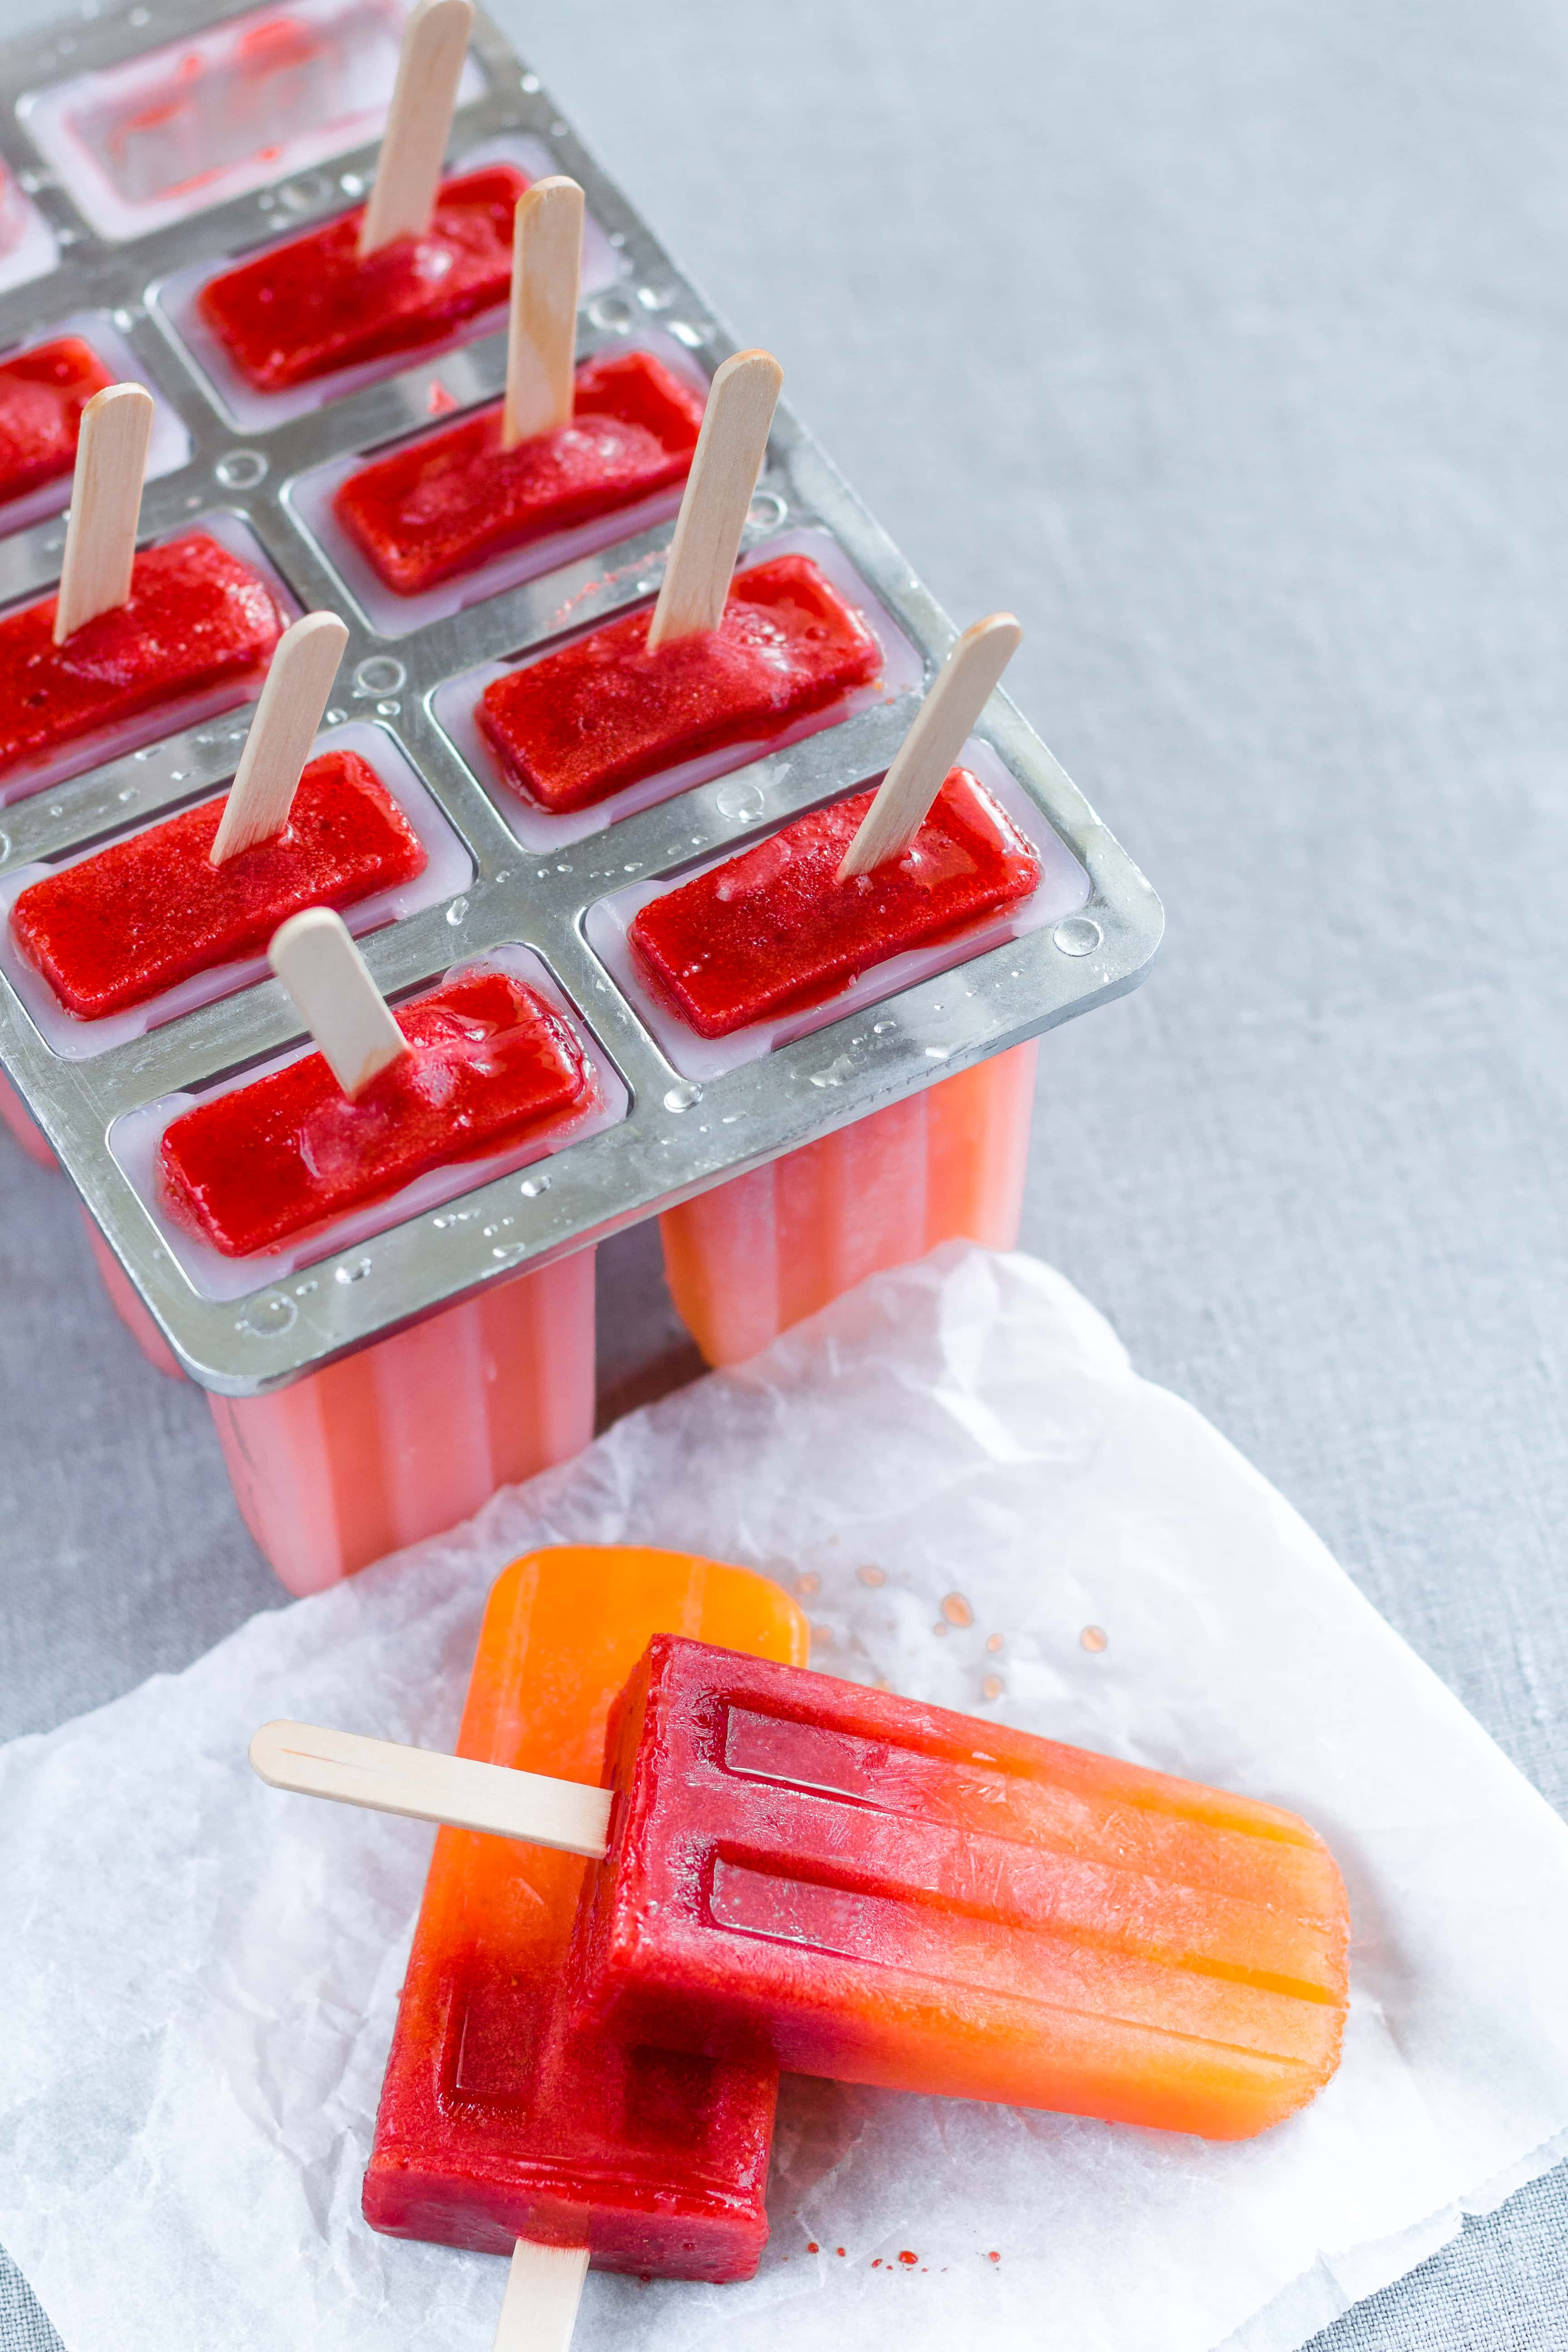 Homemade Popsicles You Must Make This Summer